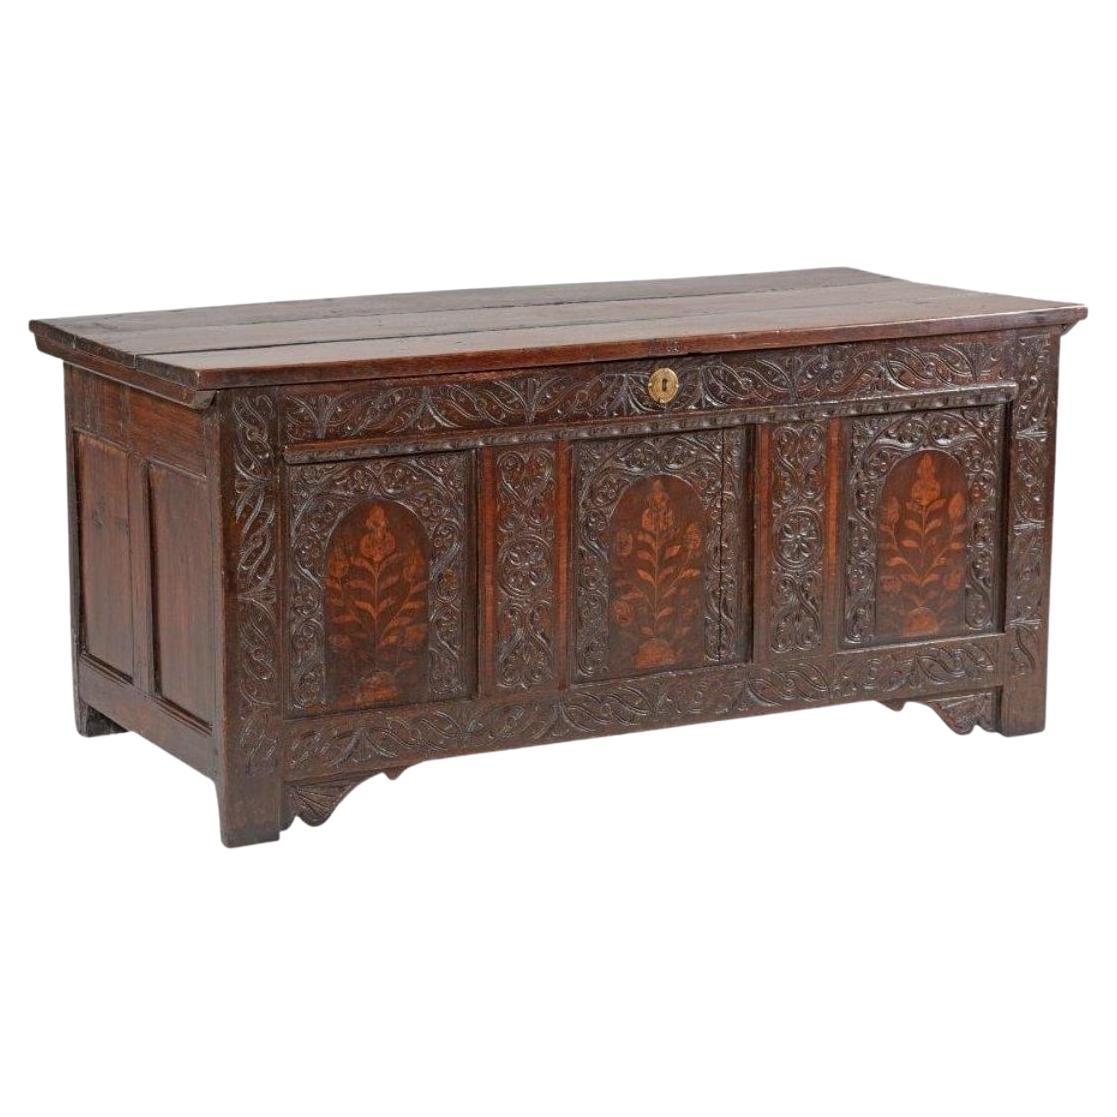 Late 18th Century English Carved Oak Blanket Chest